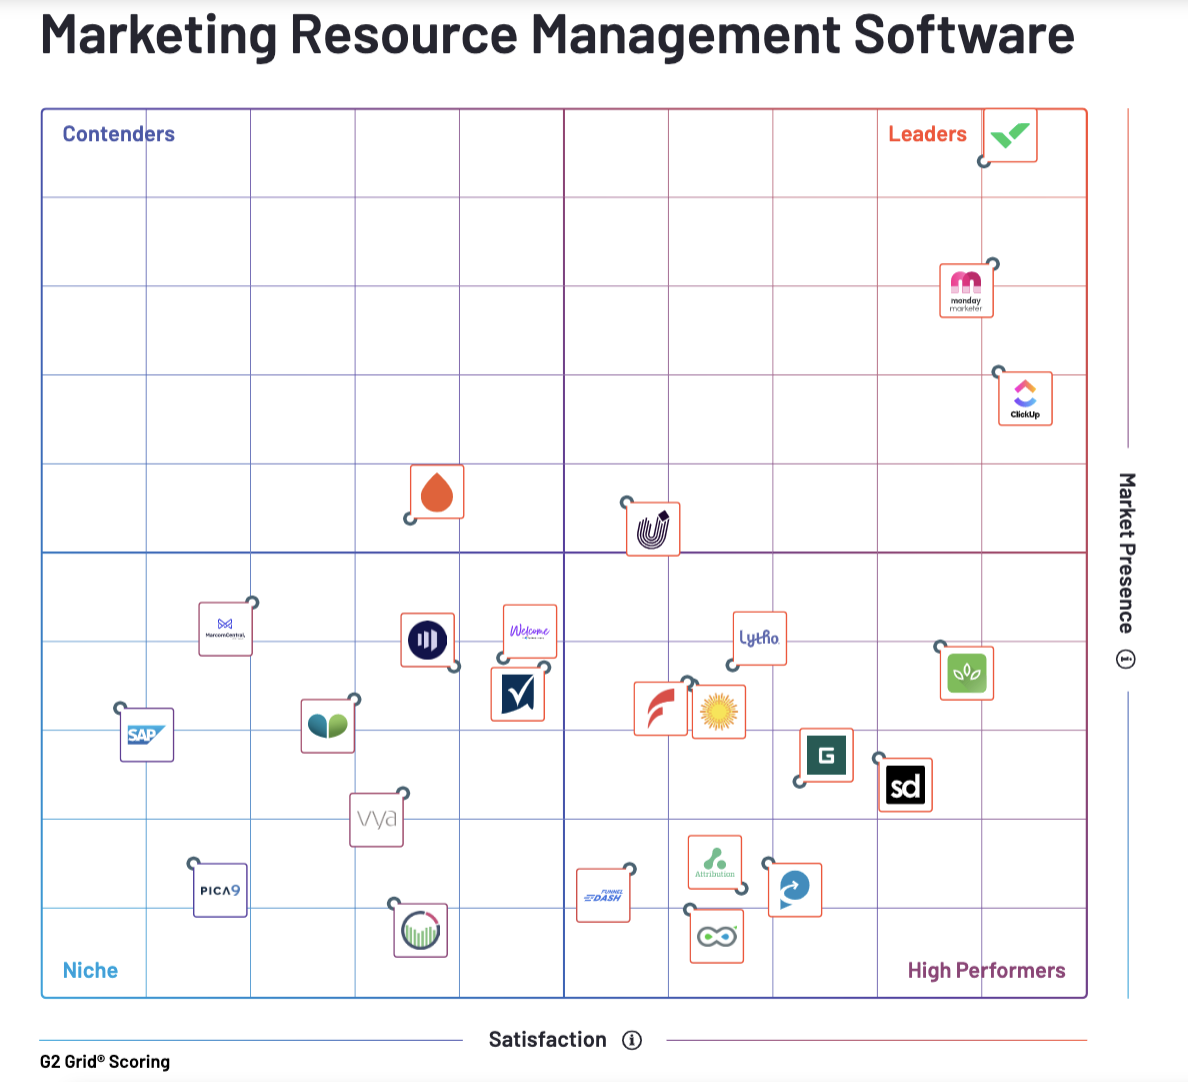 Wrike Named G2’s Software of Choice for Marketing Resource Management 2